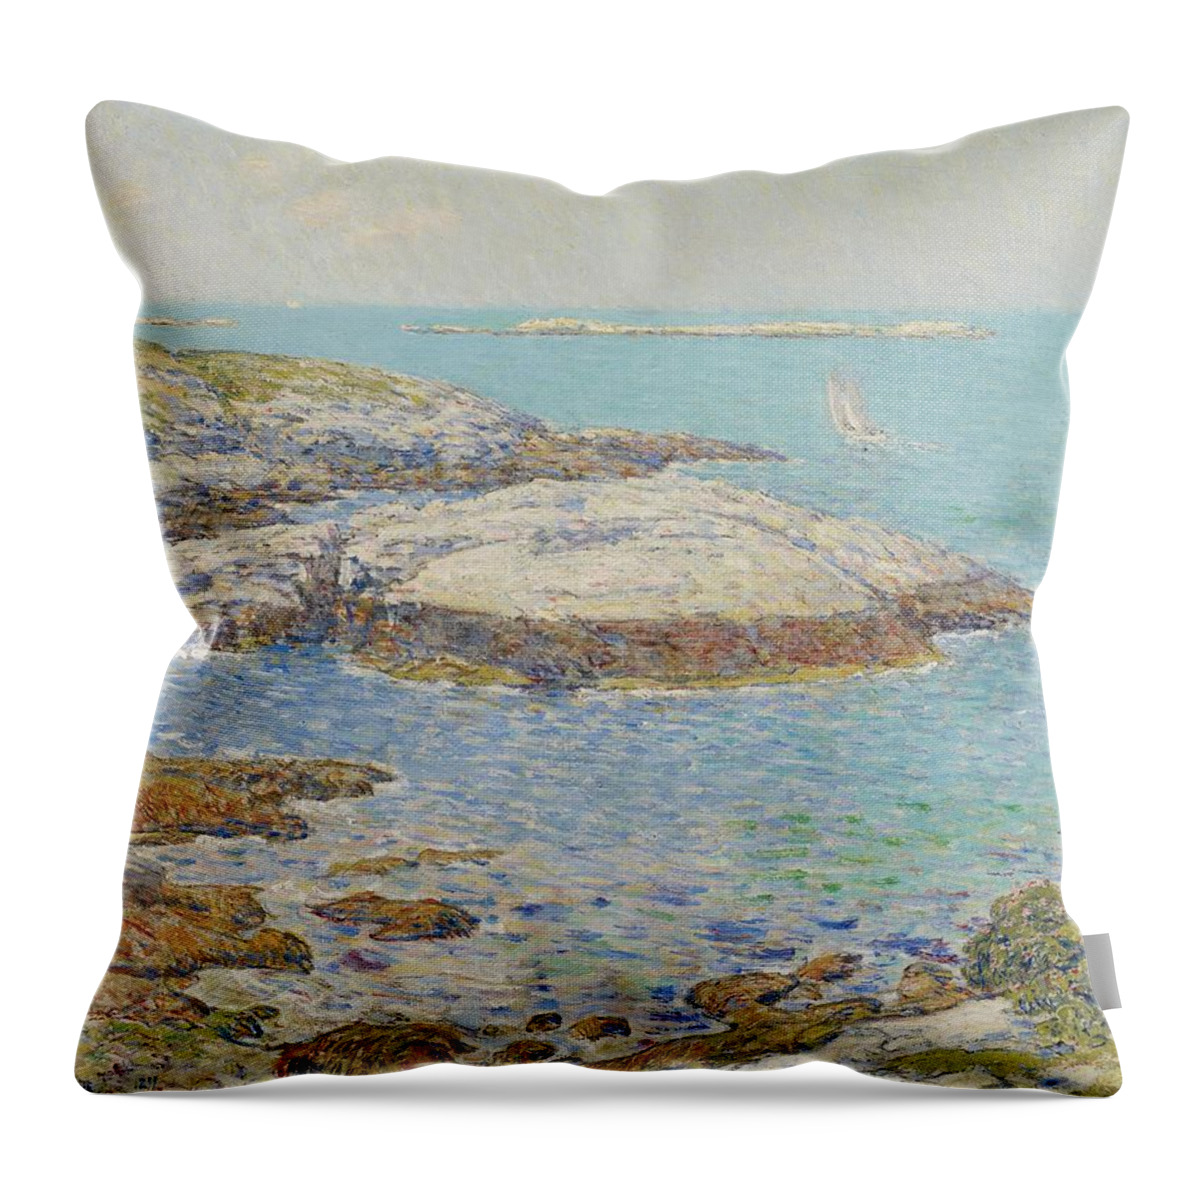 New England; America; American; Landscape; View; Coast; Coastal; Seascape; Us; Usa; United States; New Hampshire; Maine; Summer; Summertime; Isles Of Shoals; Island; Islands; Sailing Boat; Sails; Lighthouse; Rocks; Rocky; Shore; Shoreline; Impressionism; Impressionist; Sea Throw Pillow featuring the painting Isles of Shoals by Childe Hassam